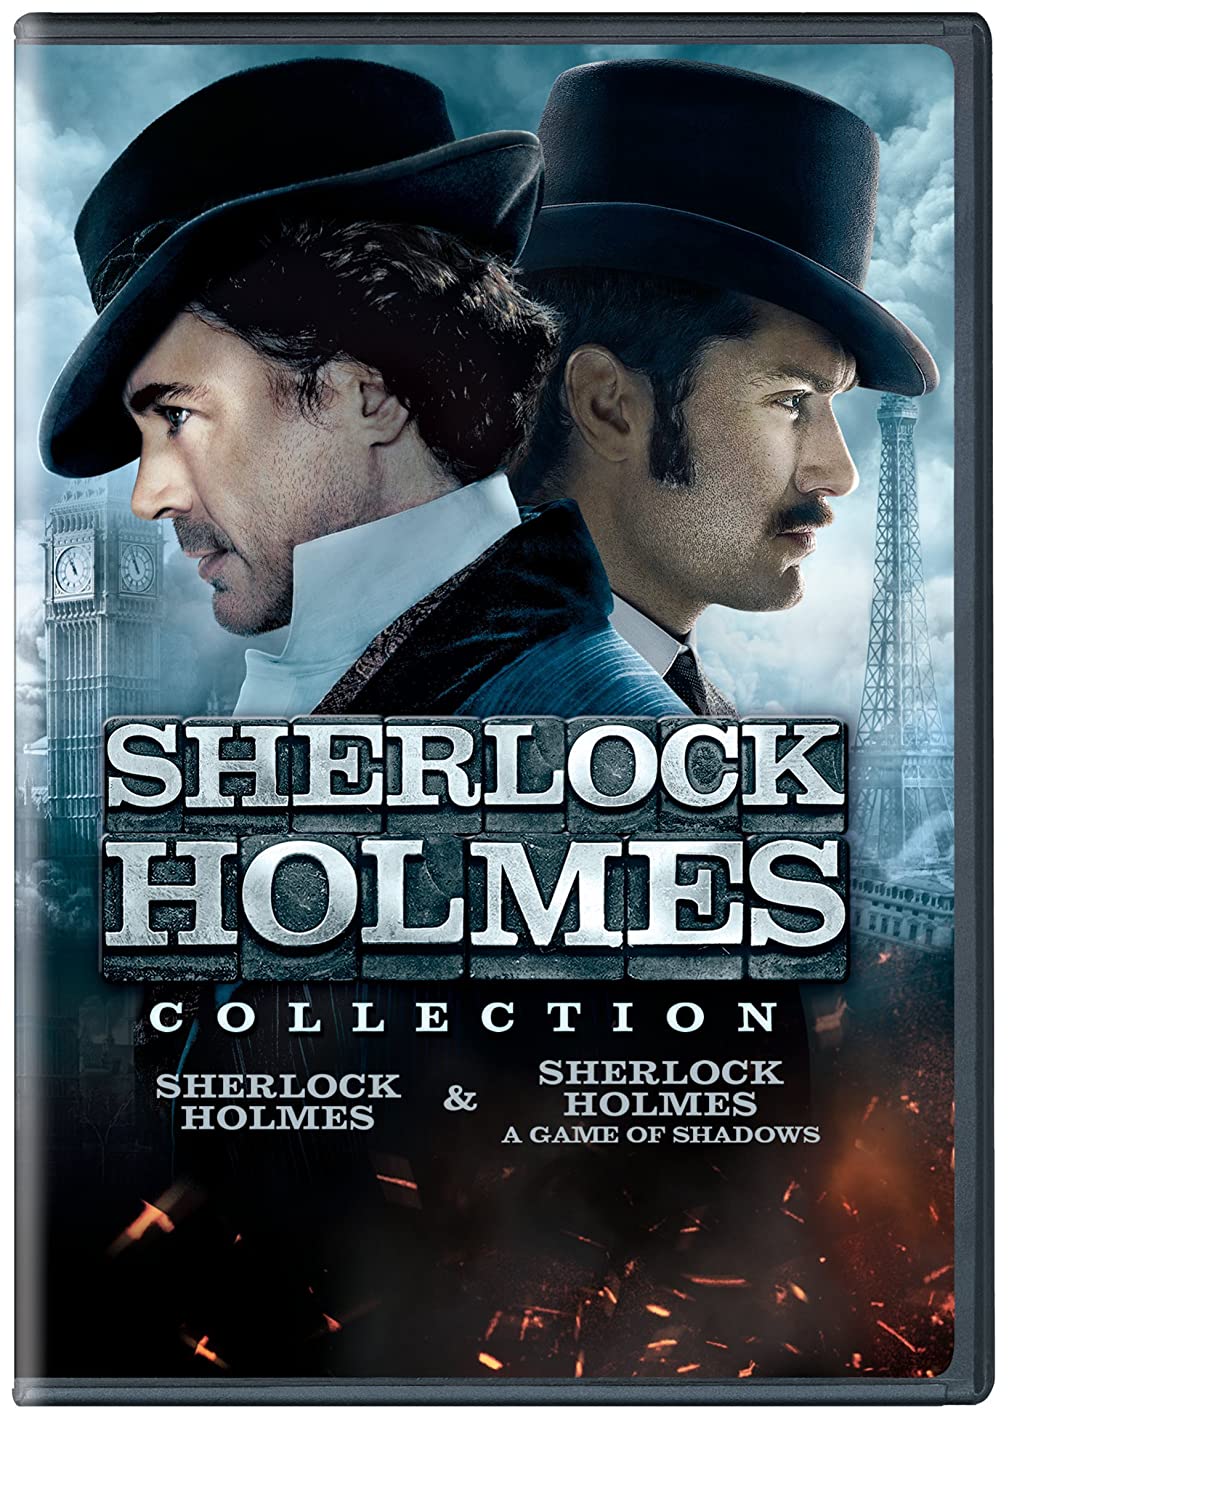 Sherlock Holmes/Sherlock Holmes: A Game Of Shadows (DVD Double Feature) - DVD [ 2011 ]  - Thriller Movies On DVD - Movies On GRUV